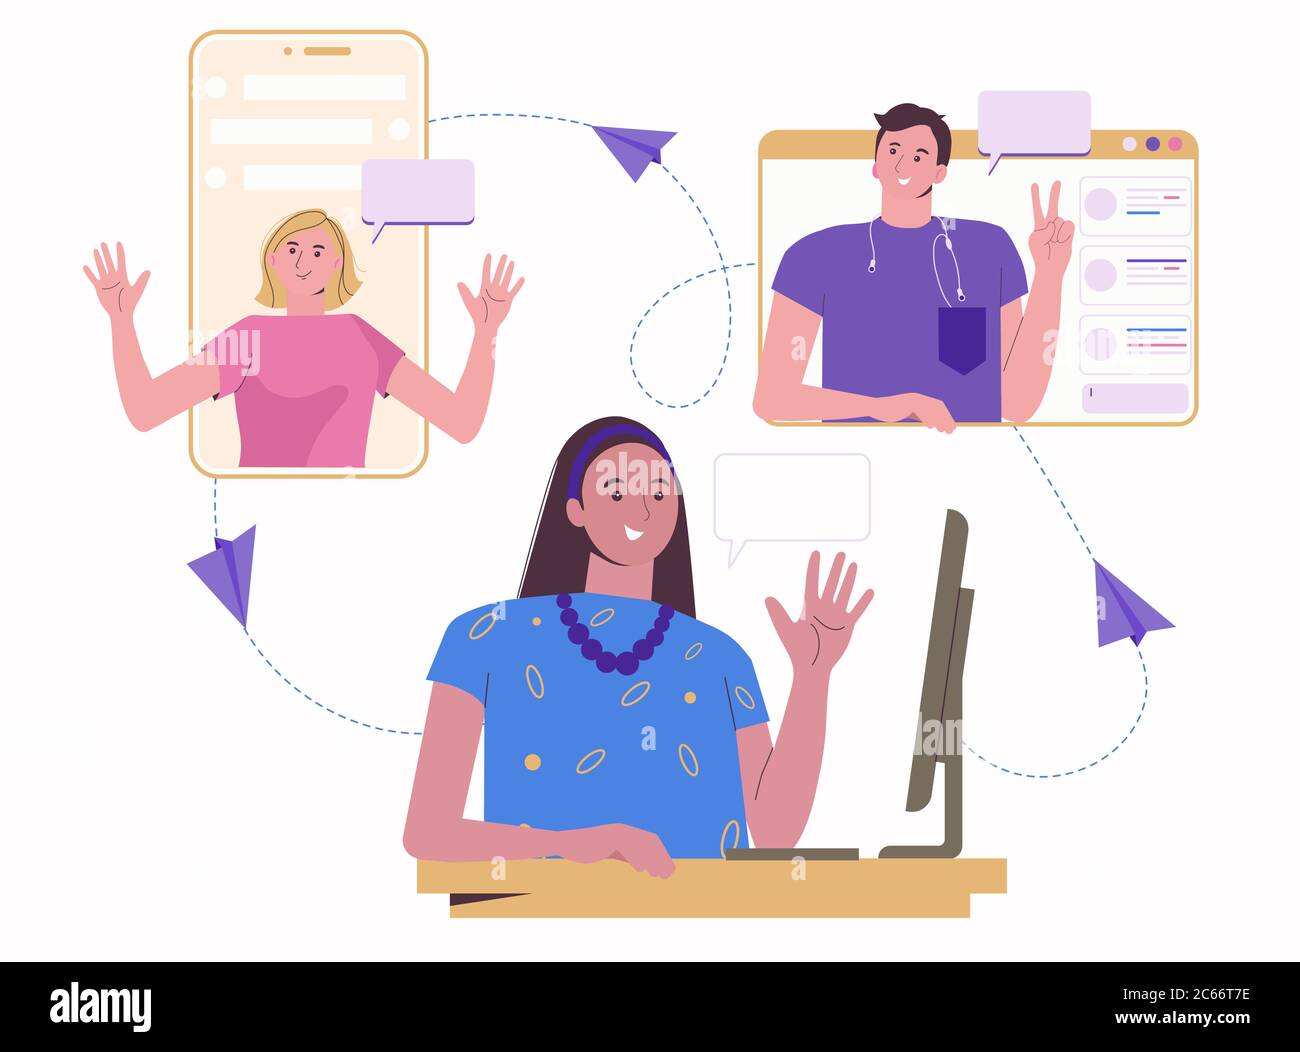 Free Vector  Person talking online with friends illustrated